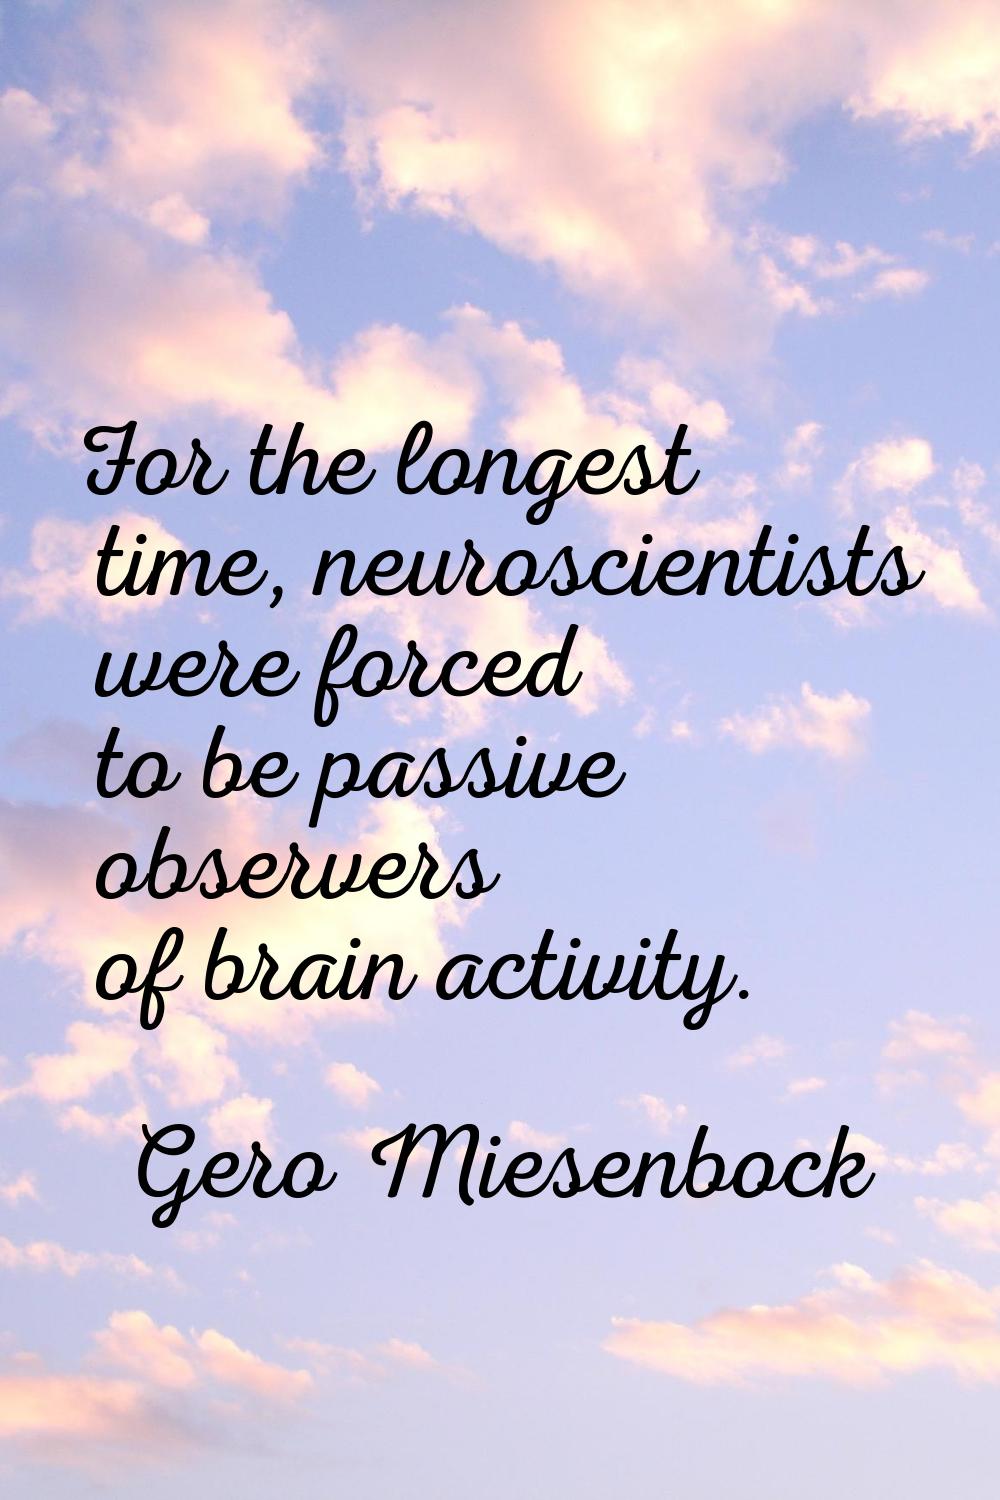 For the longest time, neuroscientists were forced to be passive observers of brain activity.